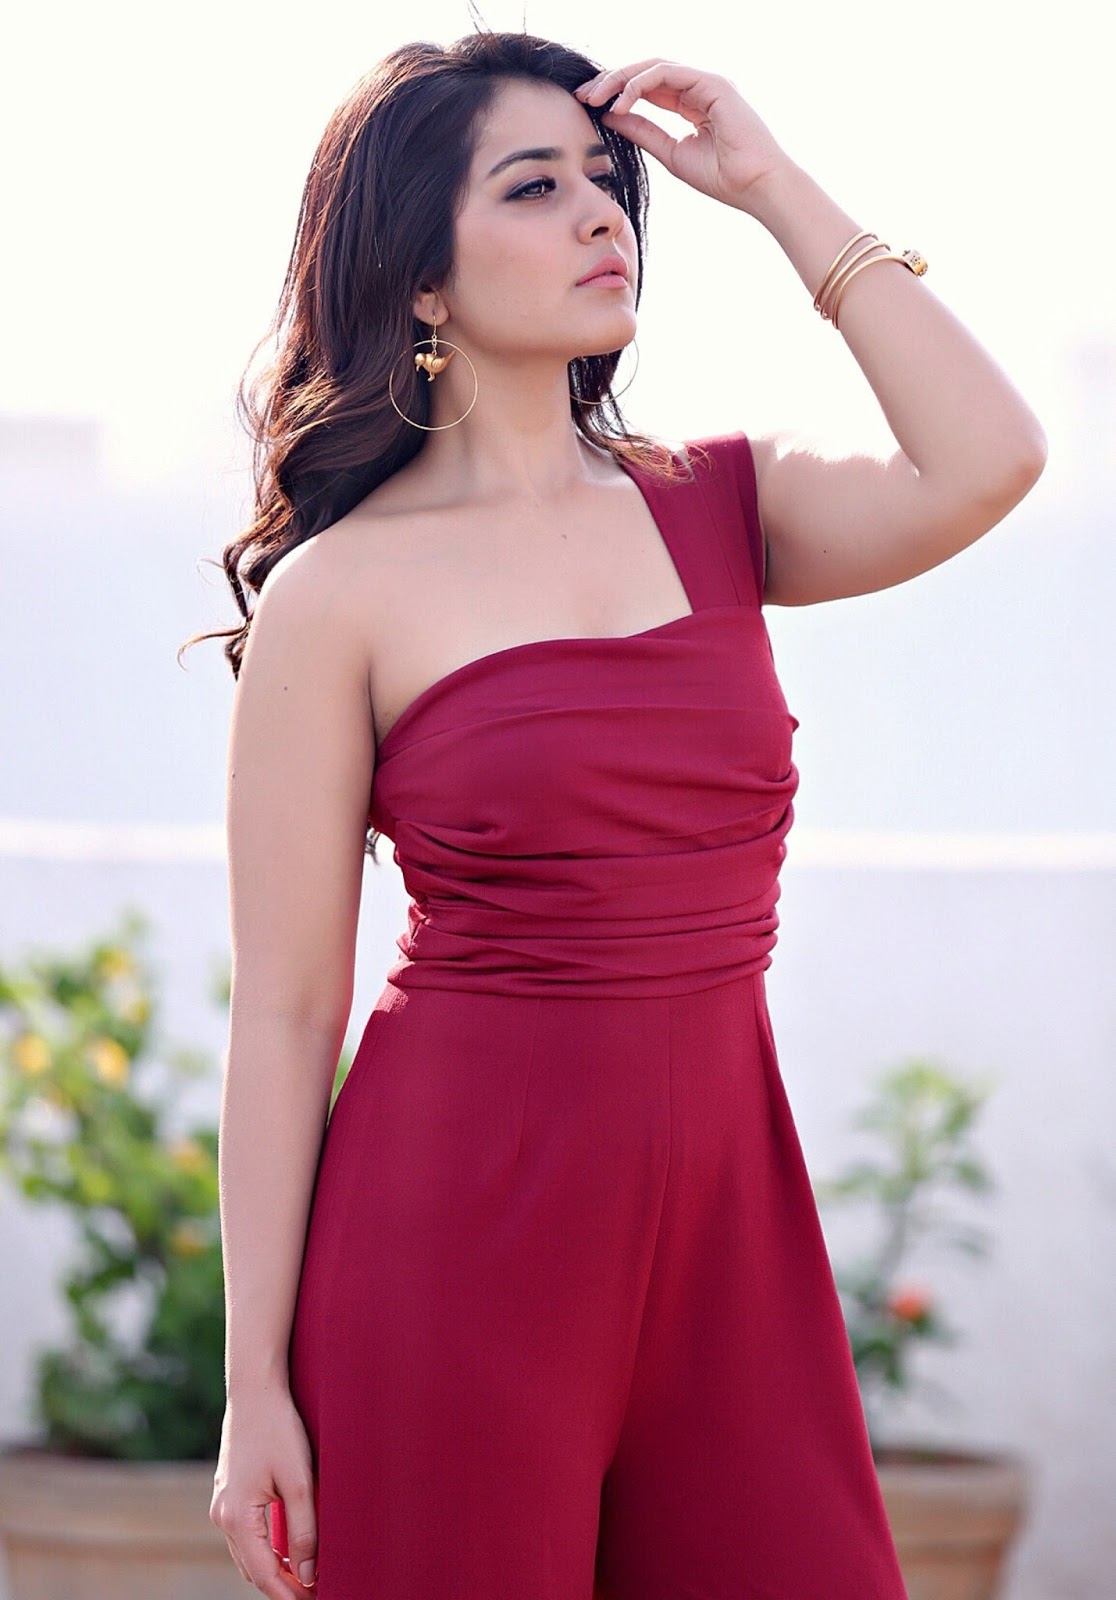 Raashi Khanna Showcasing Her Sexy Curves In Her Latest Hot Photo shoot